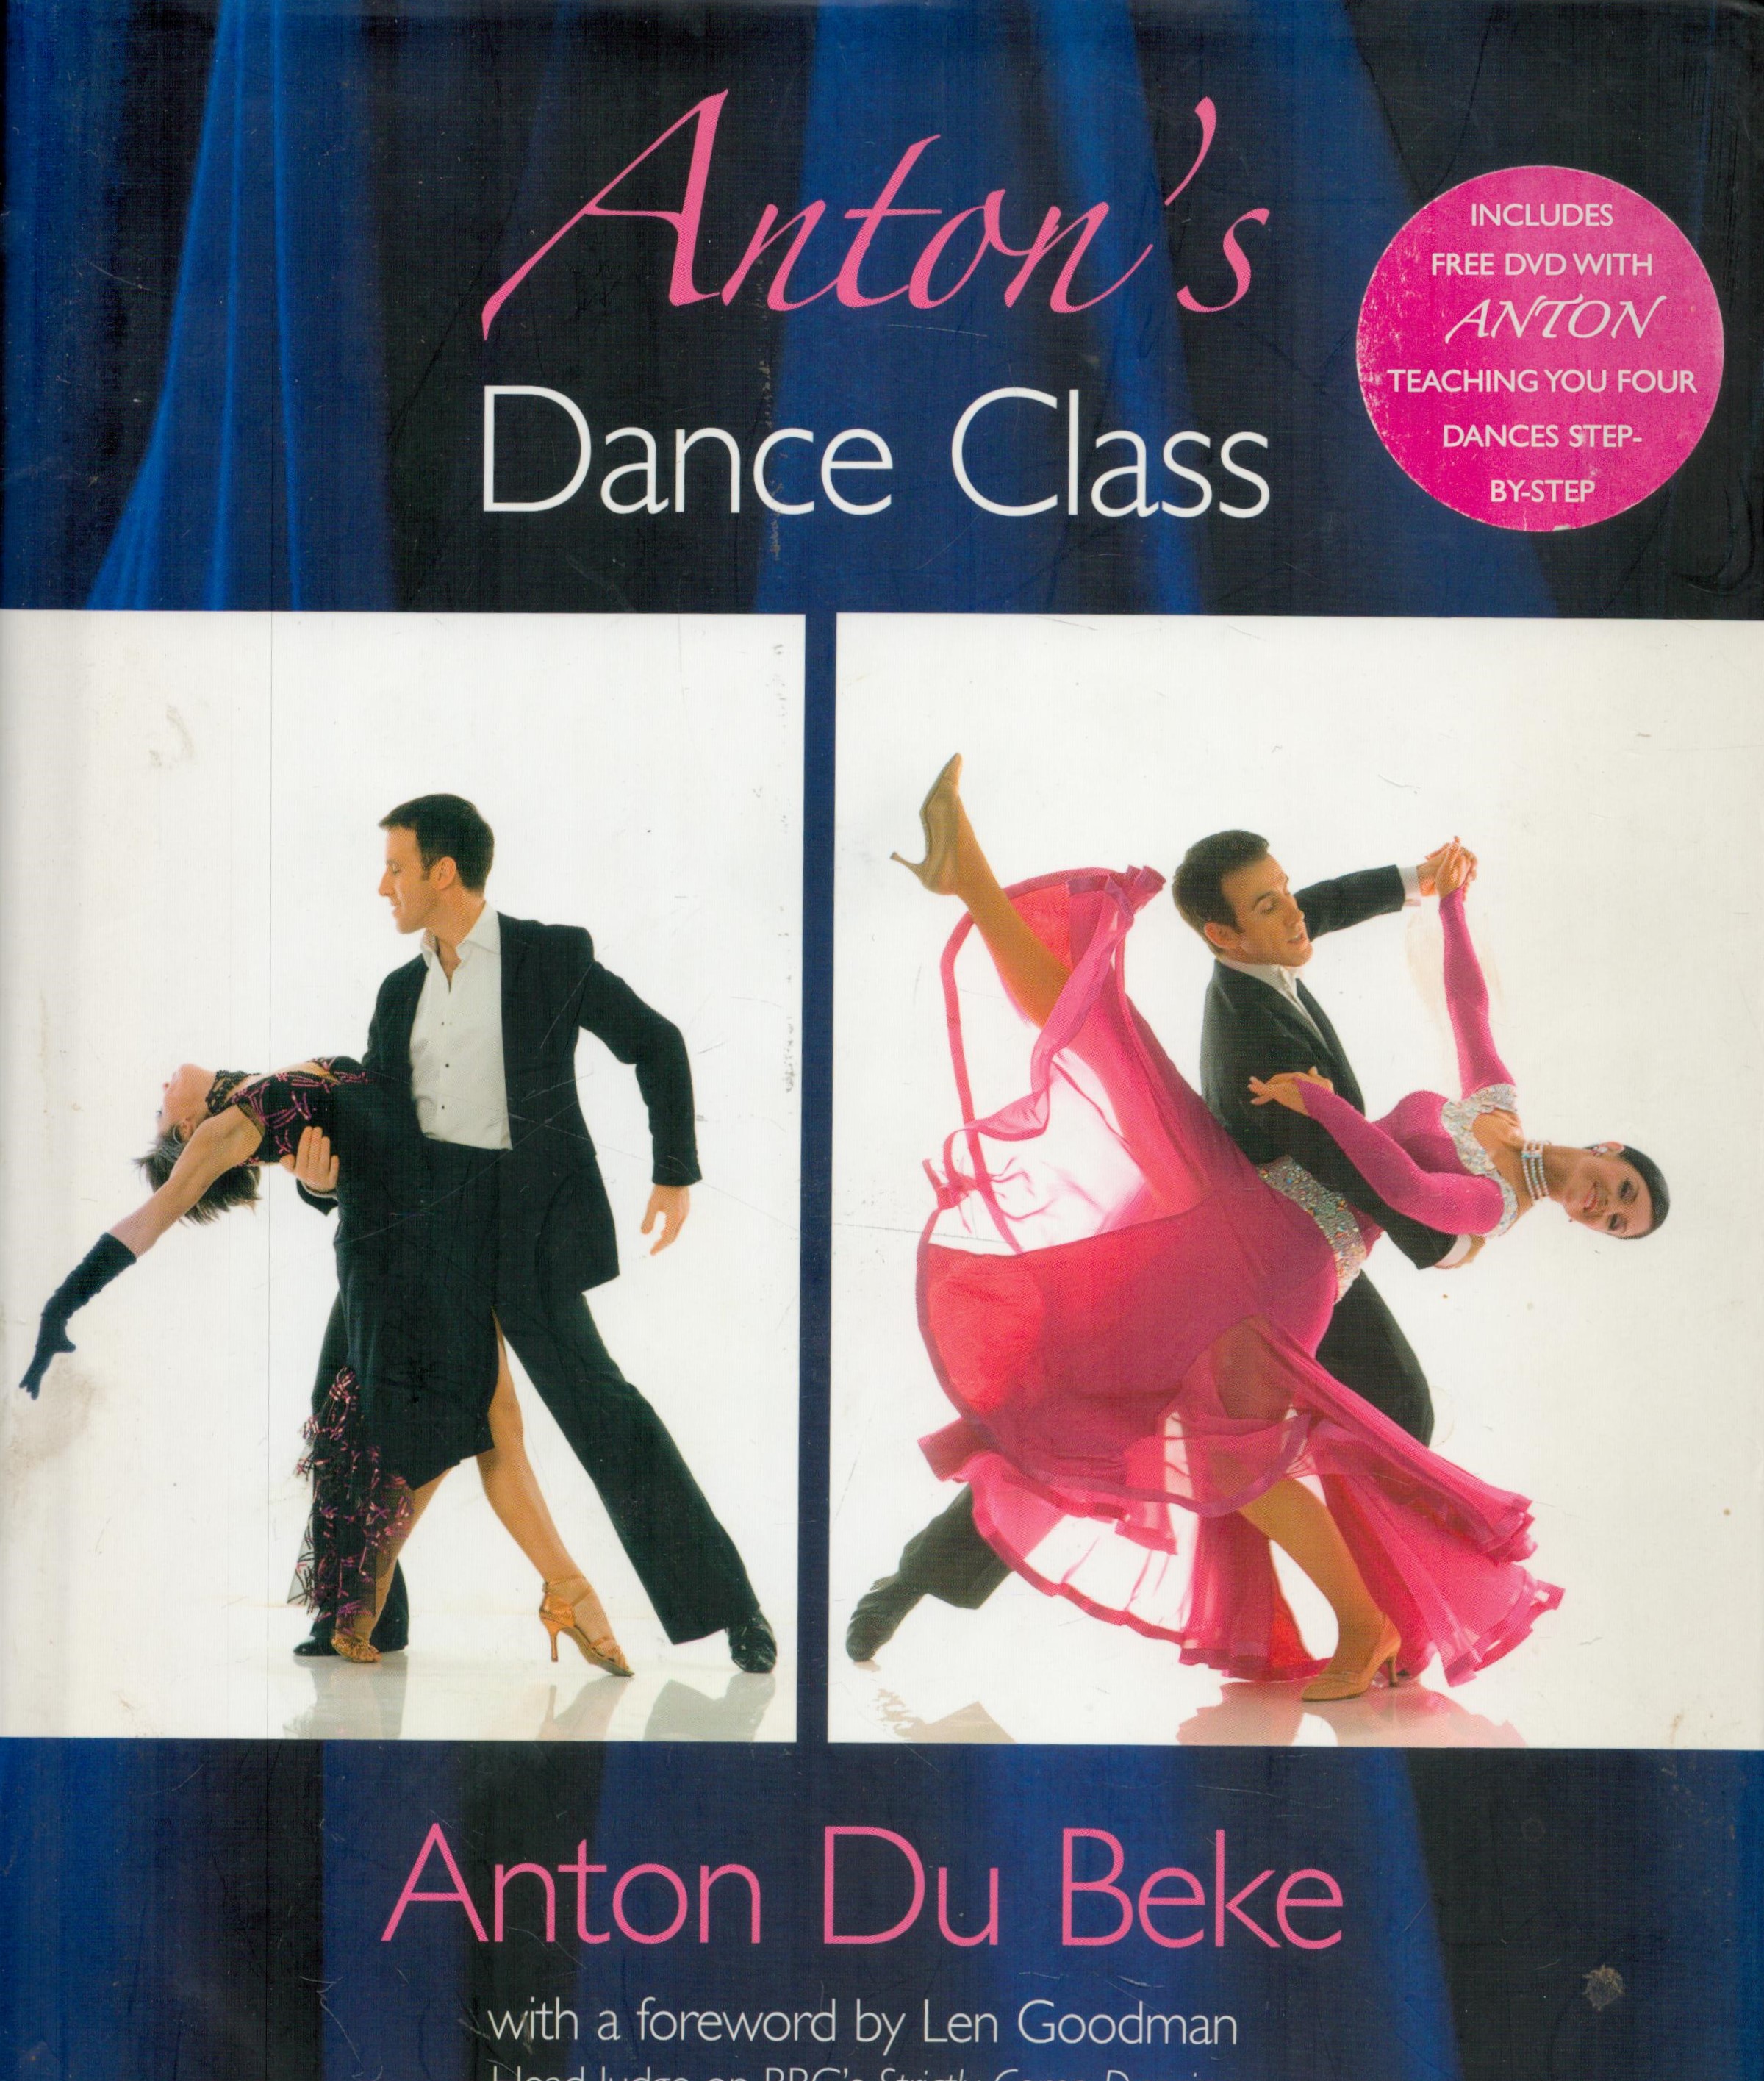 Anton Du Beke Signed Book Anton's Dance Class by Anton Du Beke 2007 First Edition Hardback Book with